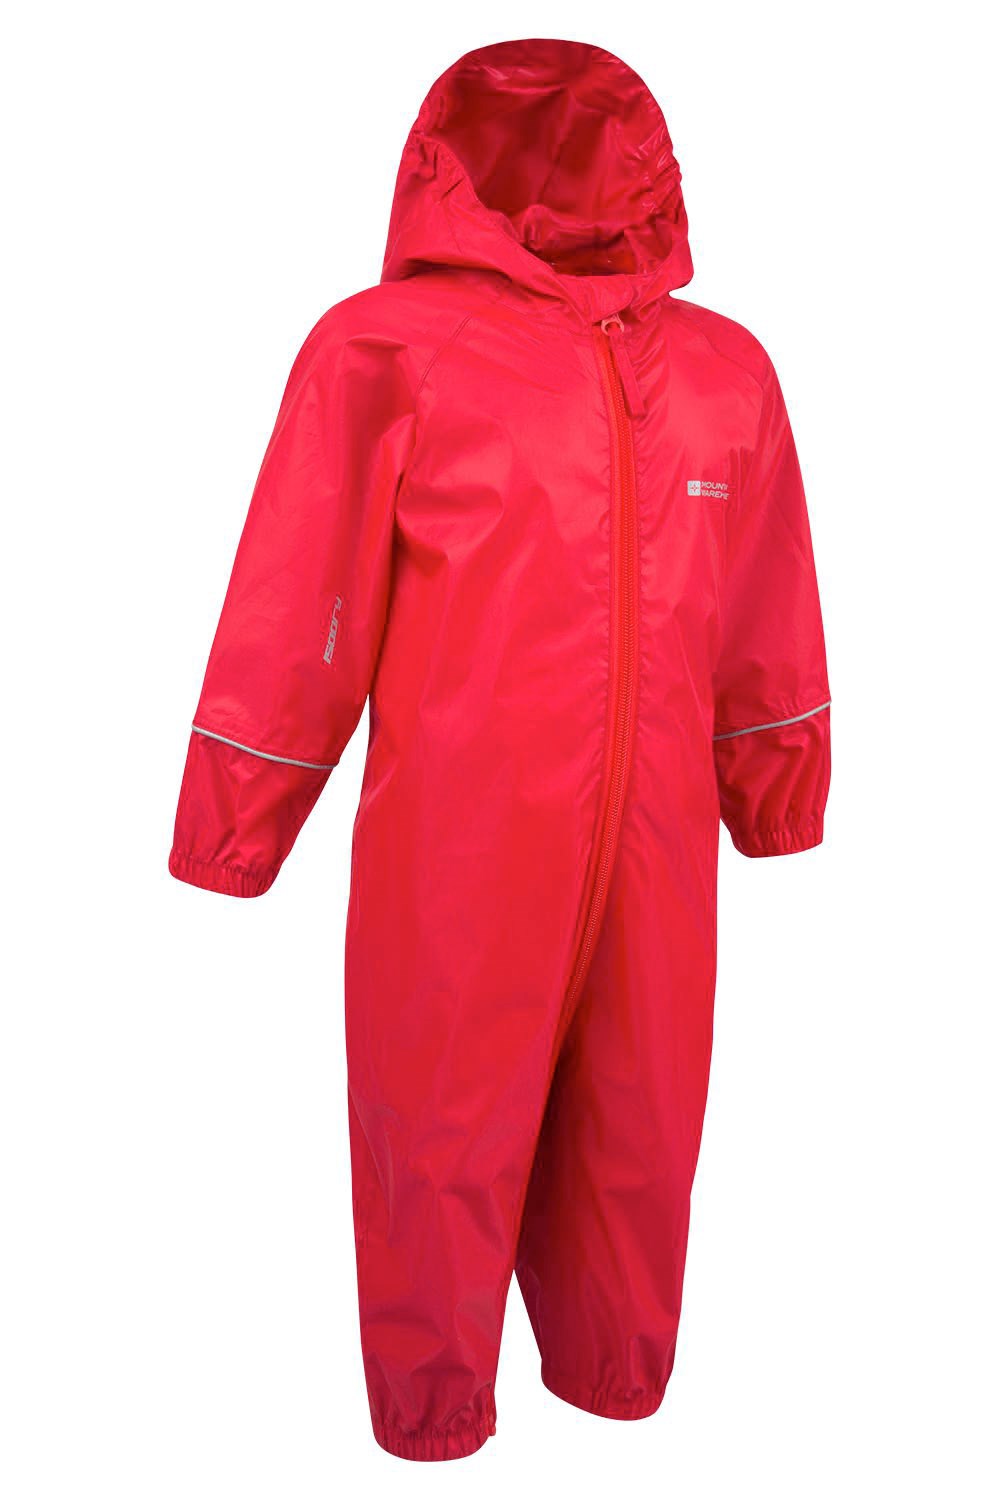 Mountain Warehouse Kids Rain Suit 100% Polyster Taped Seams and Fleece Lined 